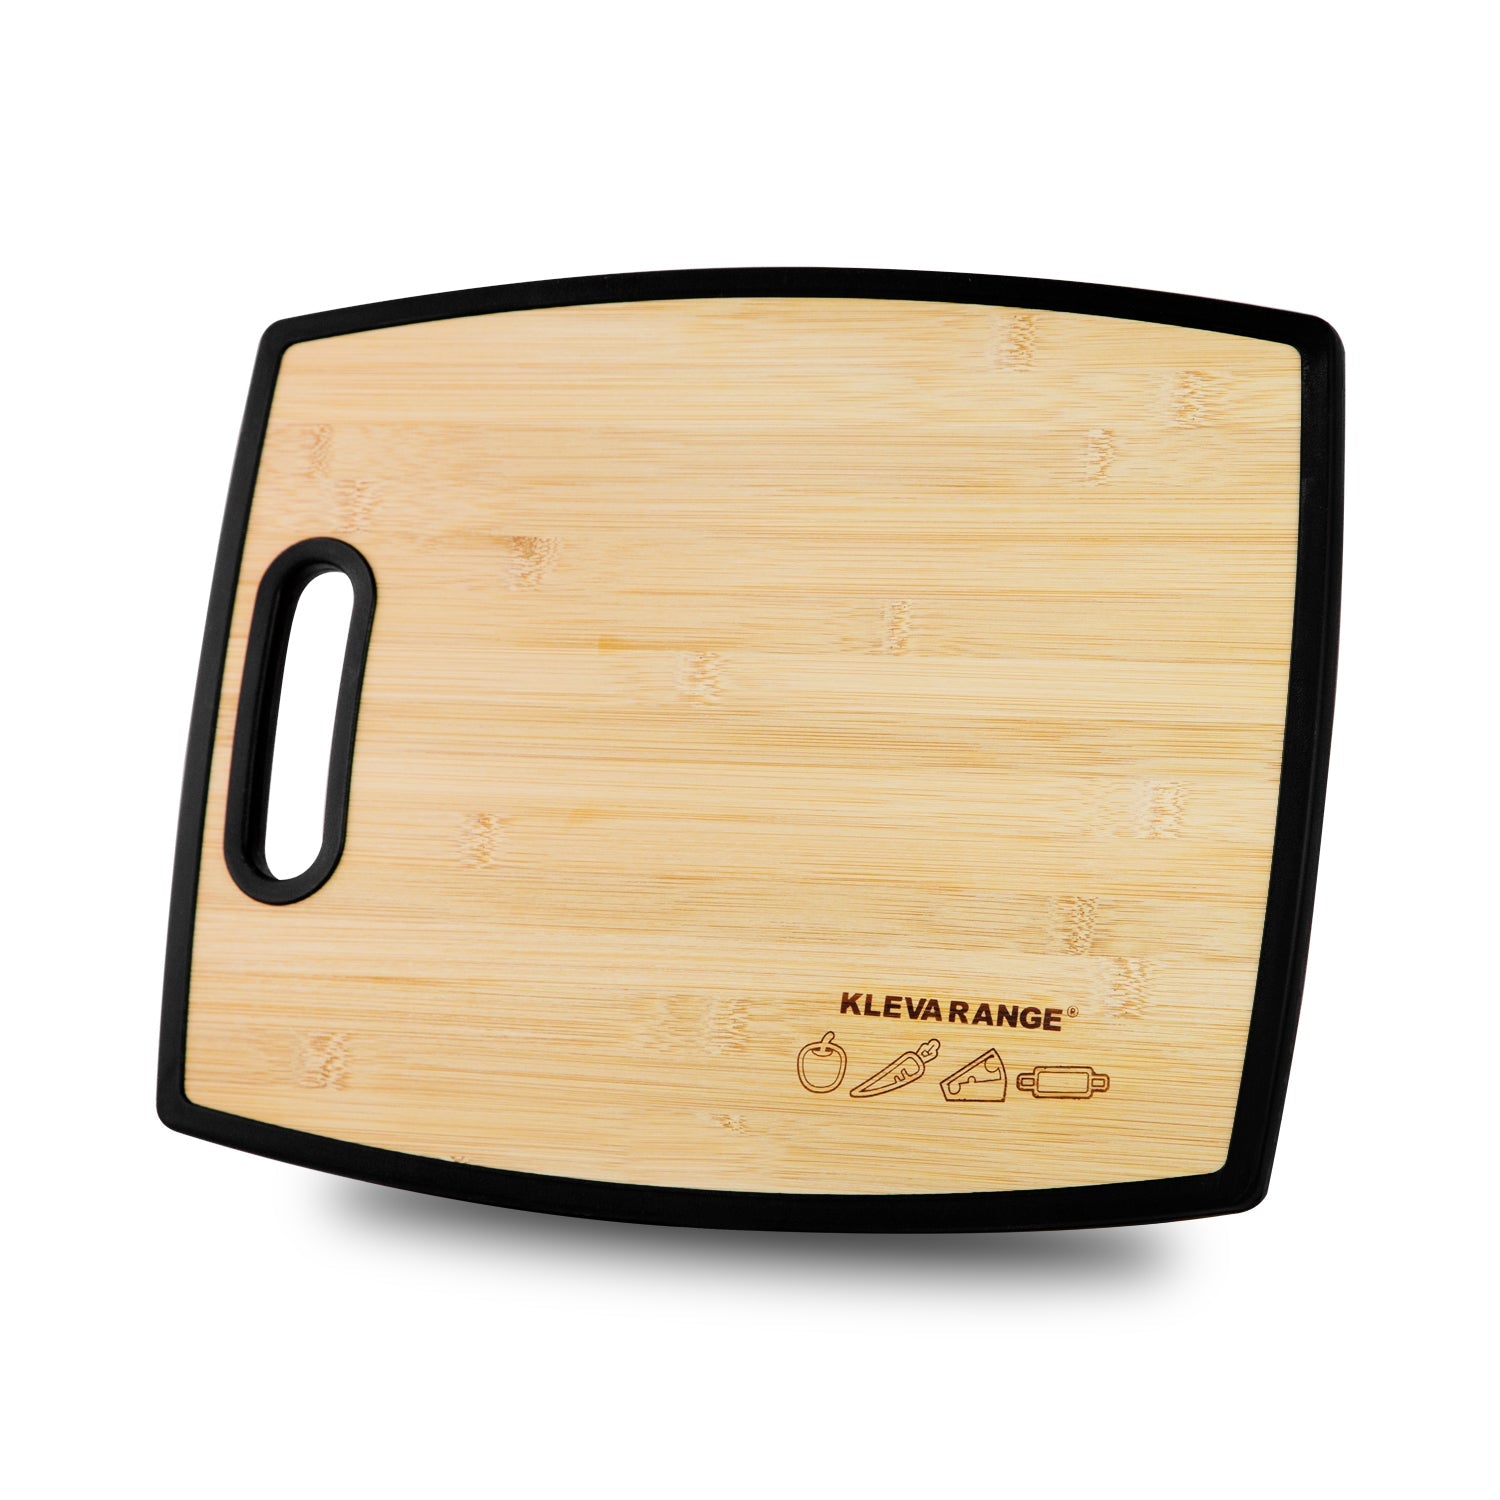 PHONE SPECIAL No More Cross Contamination With The Double Sided Chopping Board - 3 Sizes Available! PHONE SPECIAL Kleva Range   